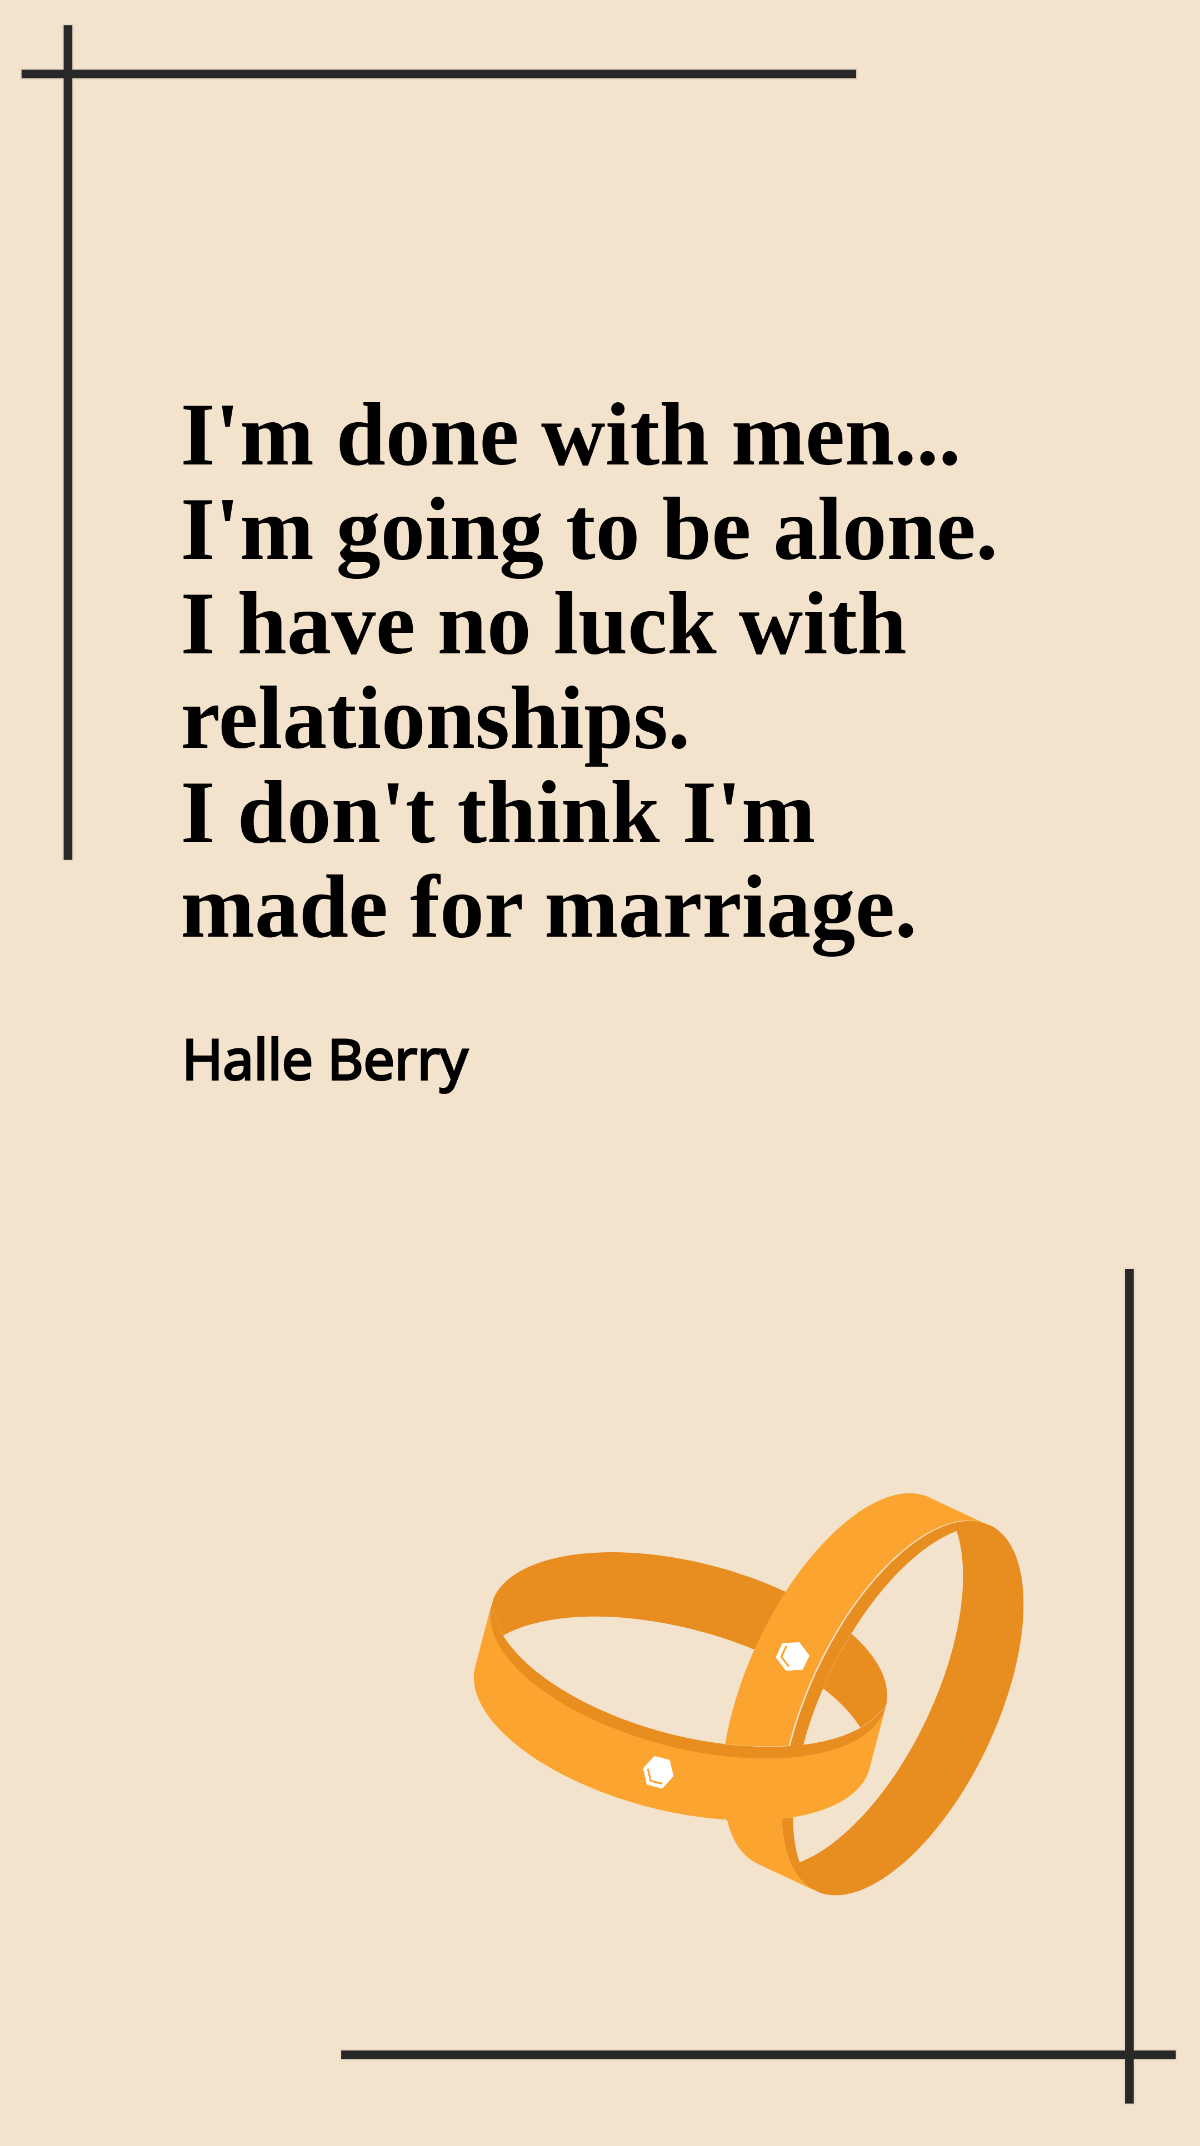 Halle Berry - I'm done with men... I'm going to be alone. I have no luck with relationships. I don't think I'm made for marriage. Template